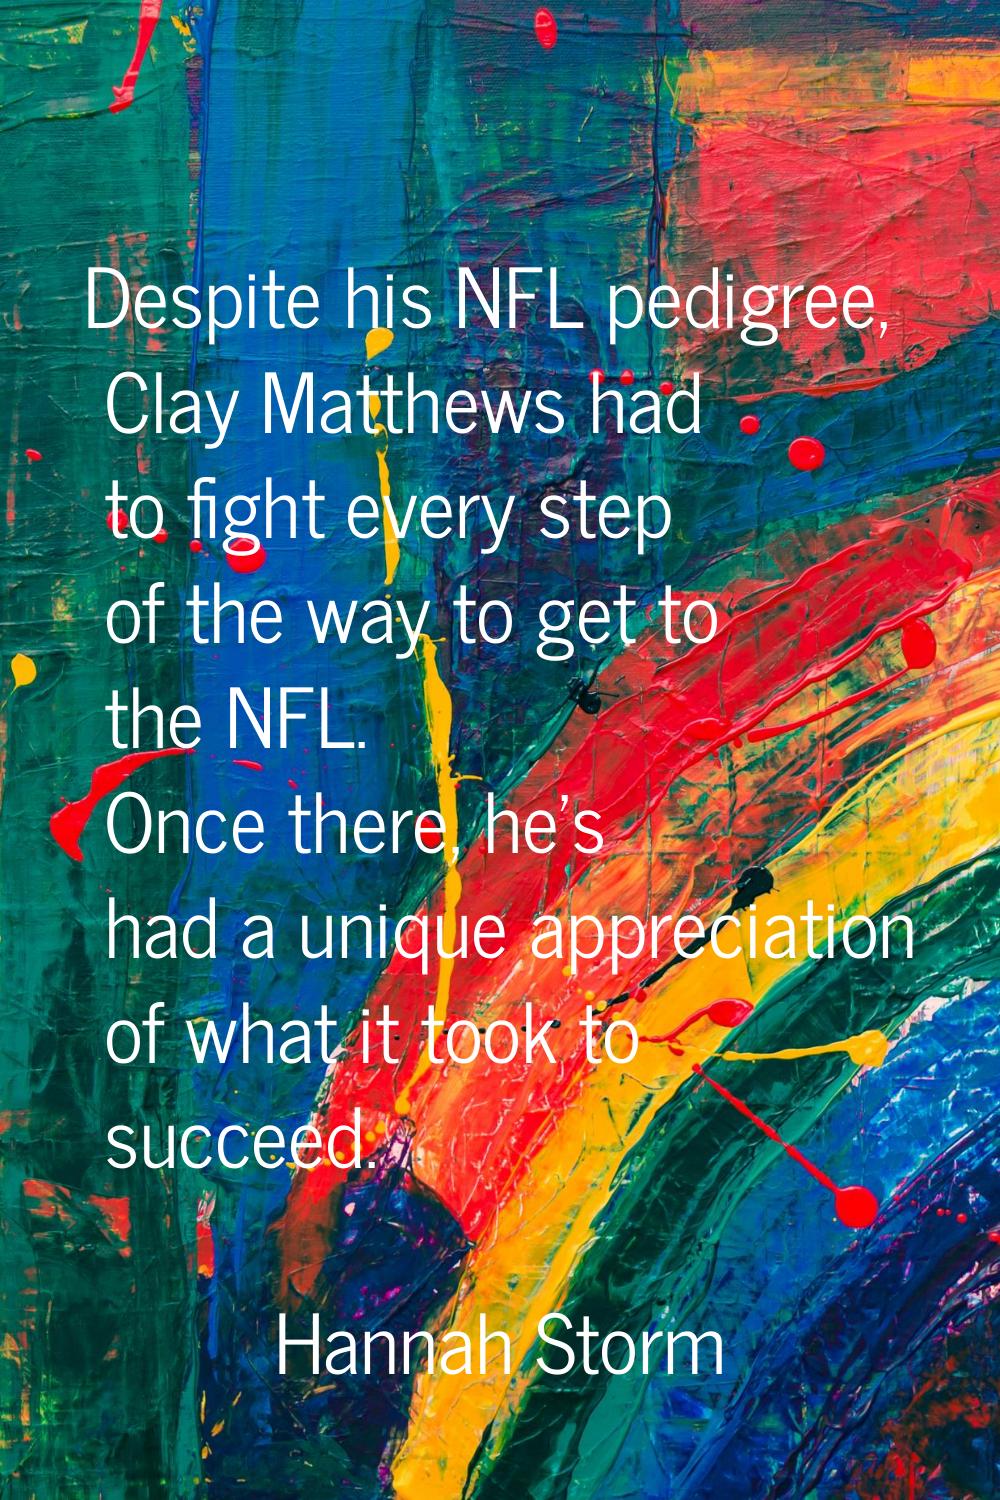 Despite his NFL pedigree, Clay Matthews had to fight every step of the way to get to the NFL. Once 